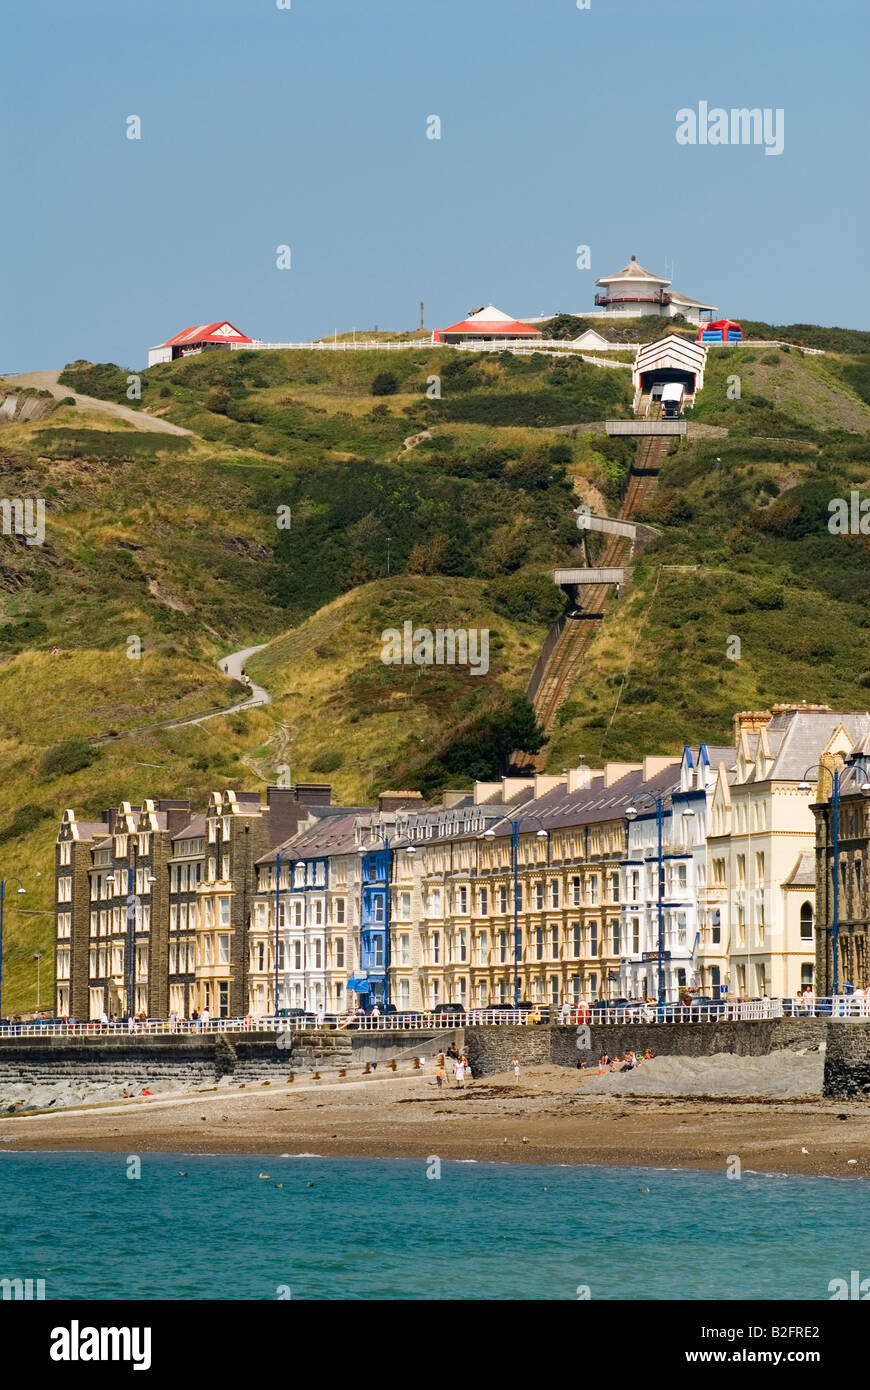 Aberystwyth Ceredigion west coast mid Wales UK 2008. Cliff elettrica ferroviaria "Constitution Hill' 2000s HOMER SYKES Foto Stock